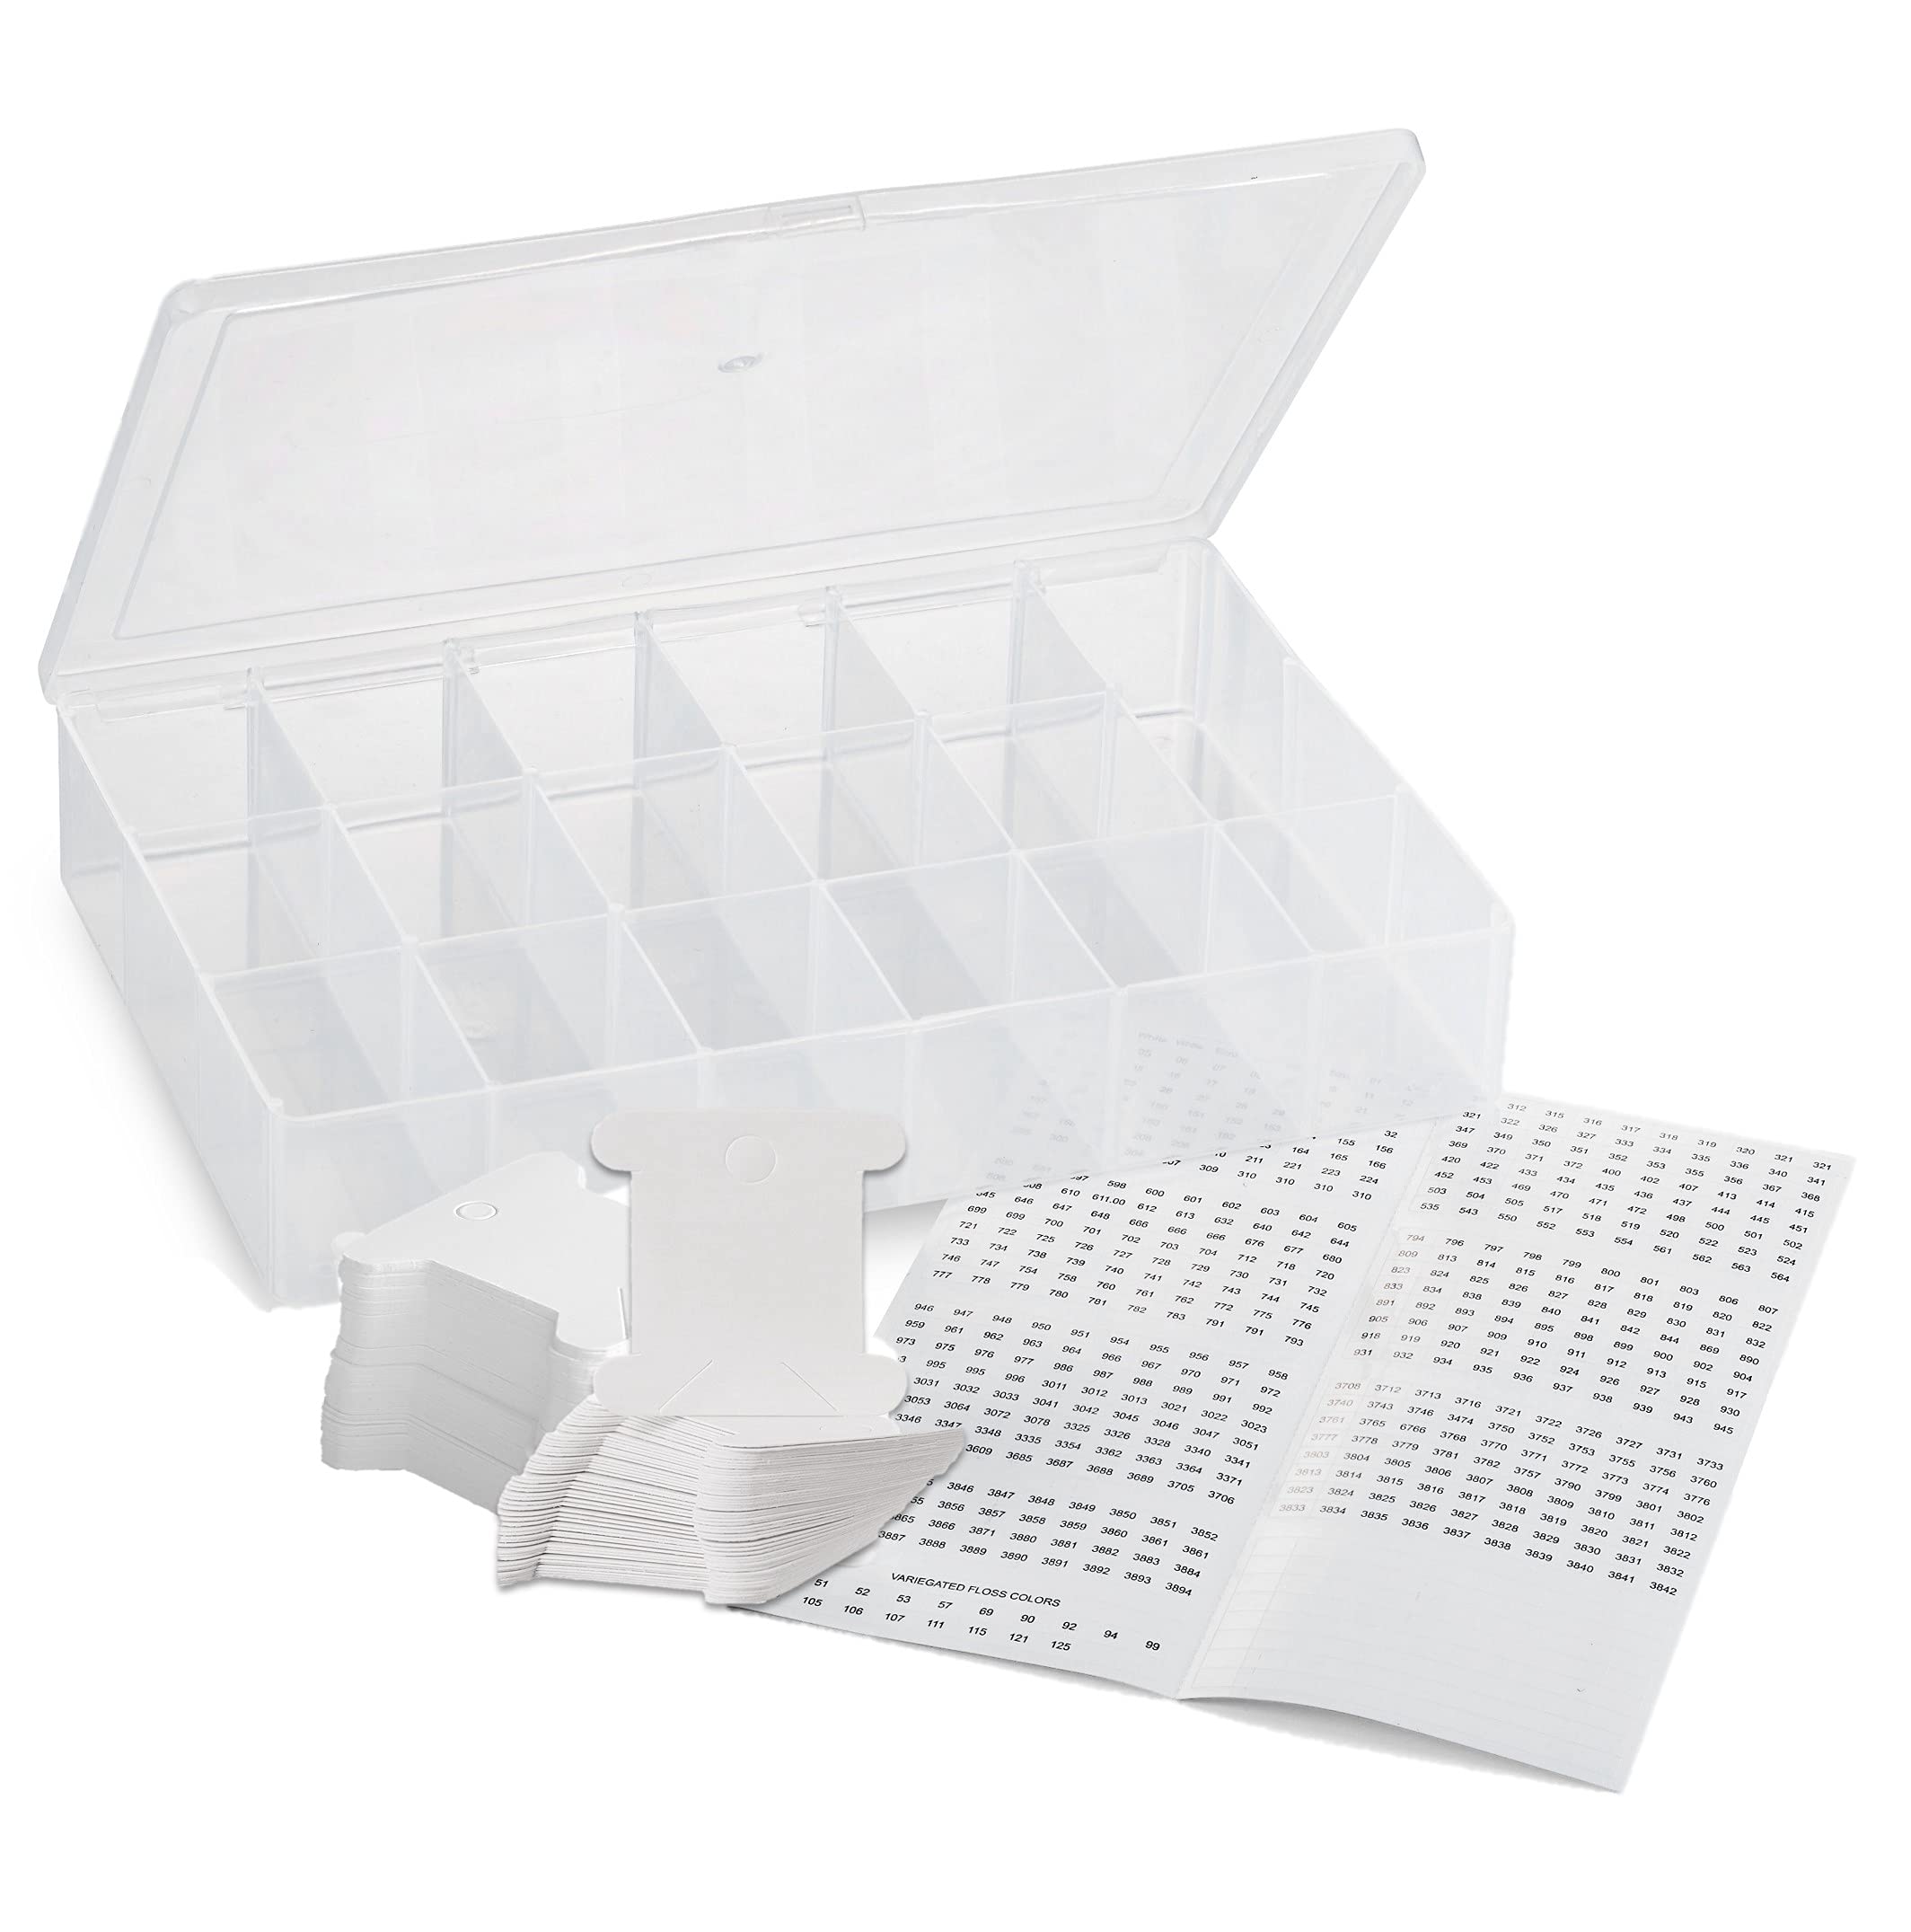 Embroidery Floss Organizer Box  17 Compartment Plastic Box with Lid, Embroidery  Thread Organizer with 100